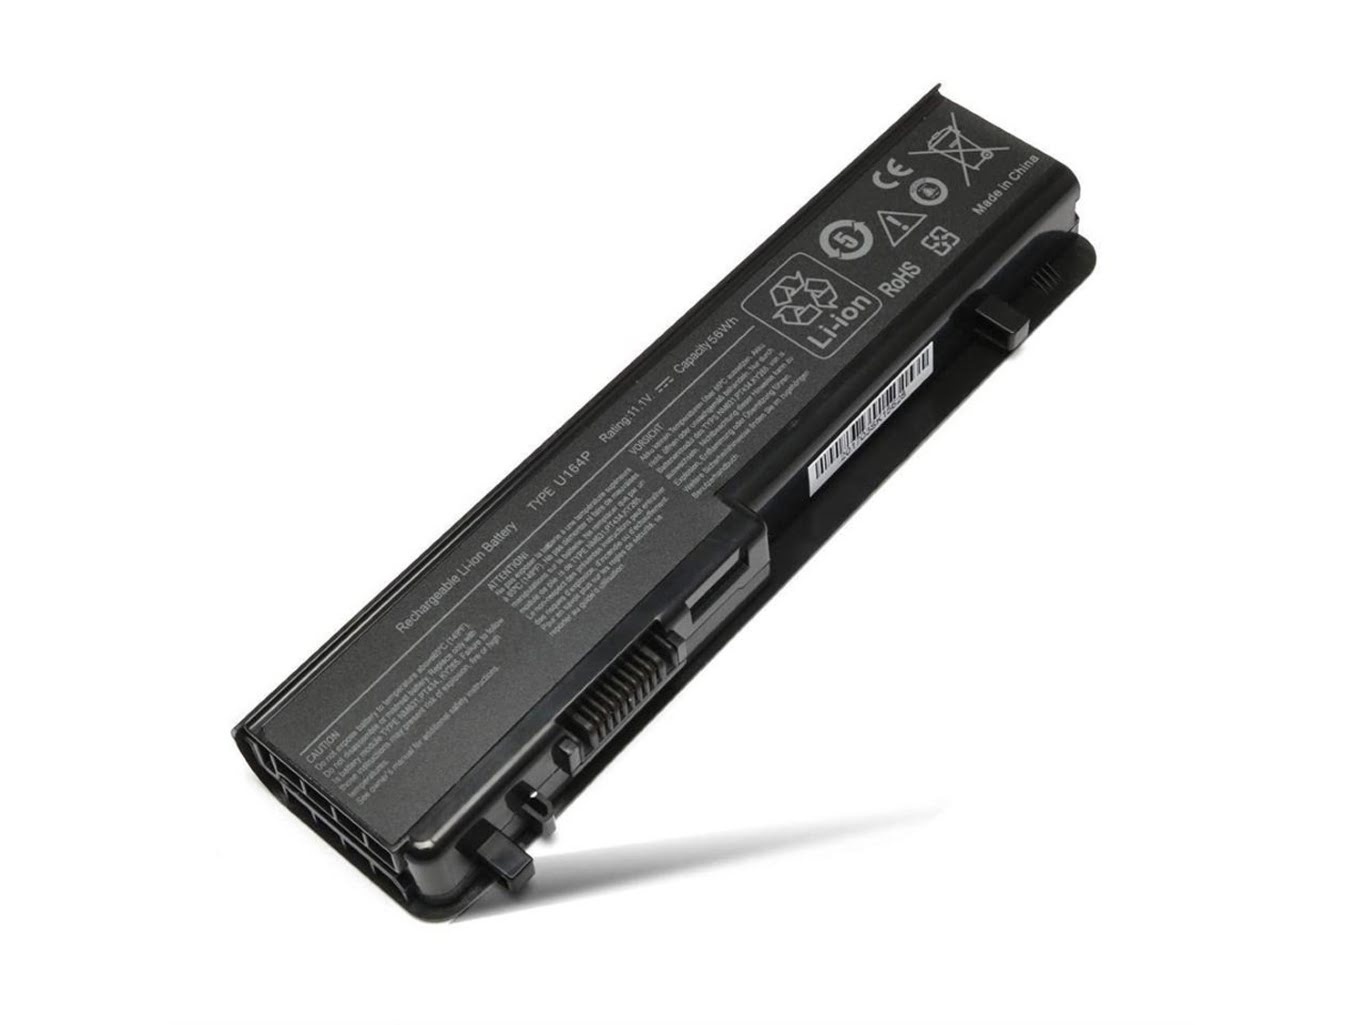 312-0186, N855P replacement Laptop Battery for Dell Studio 17, Studio 1745, 11.1V, 4400mah/49wh, 6 cells